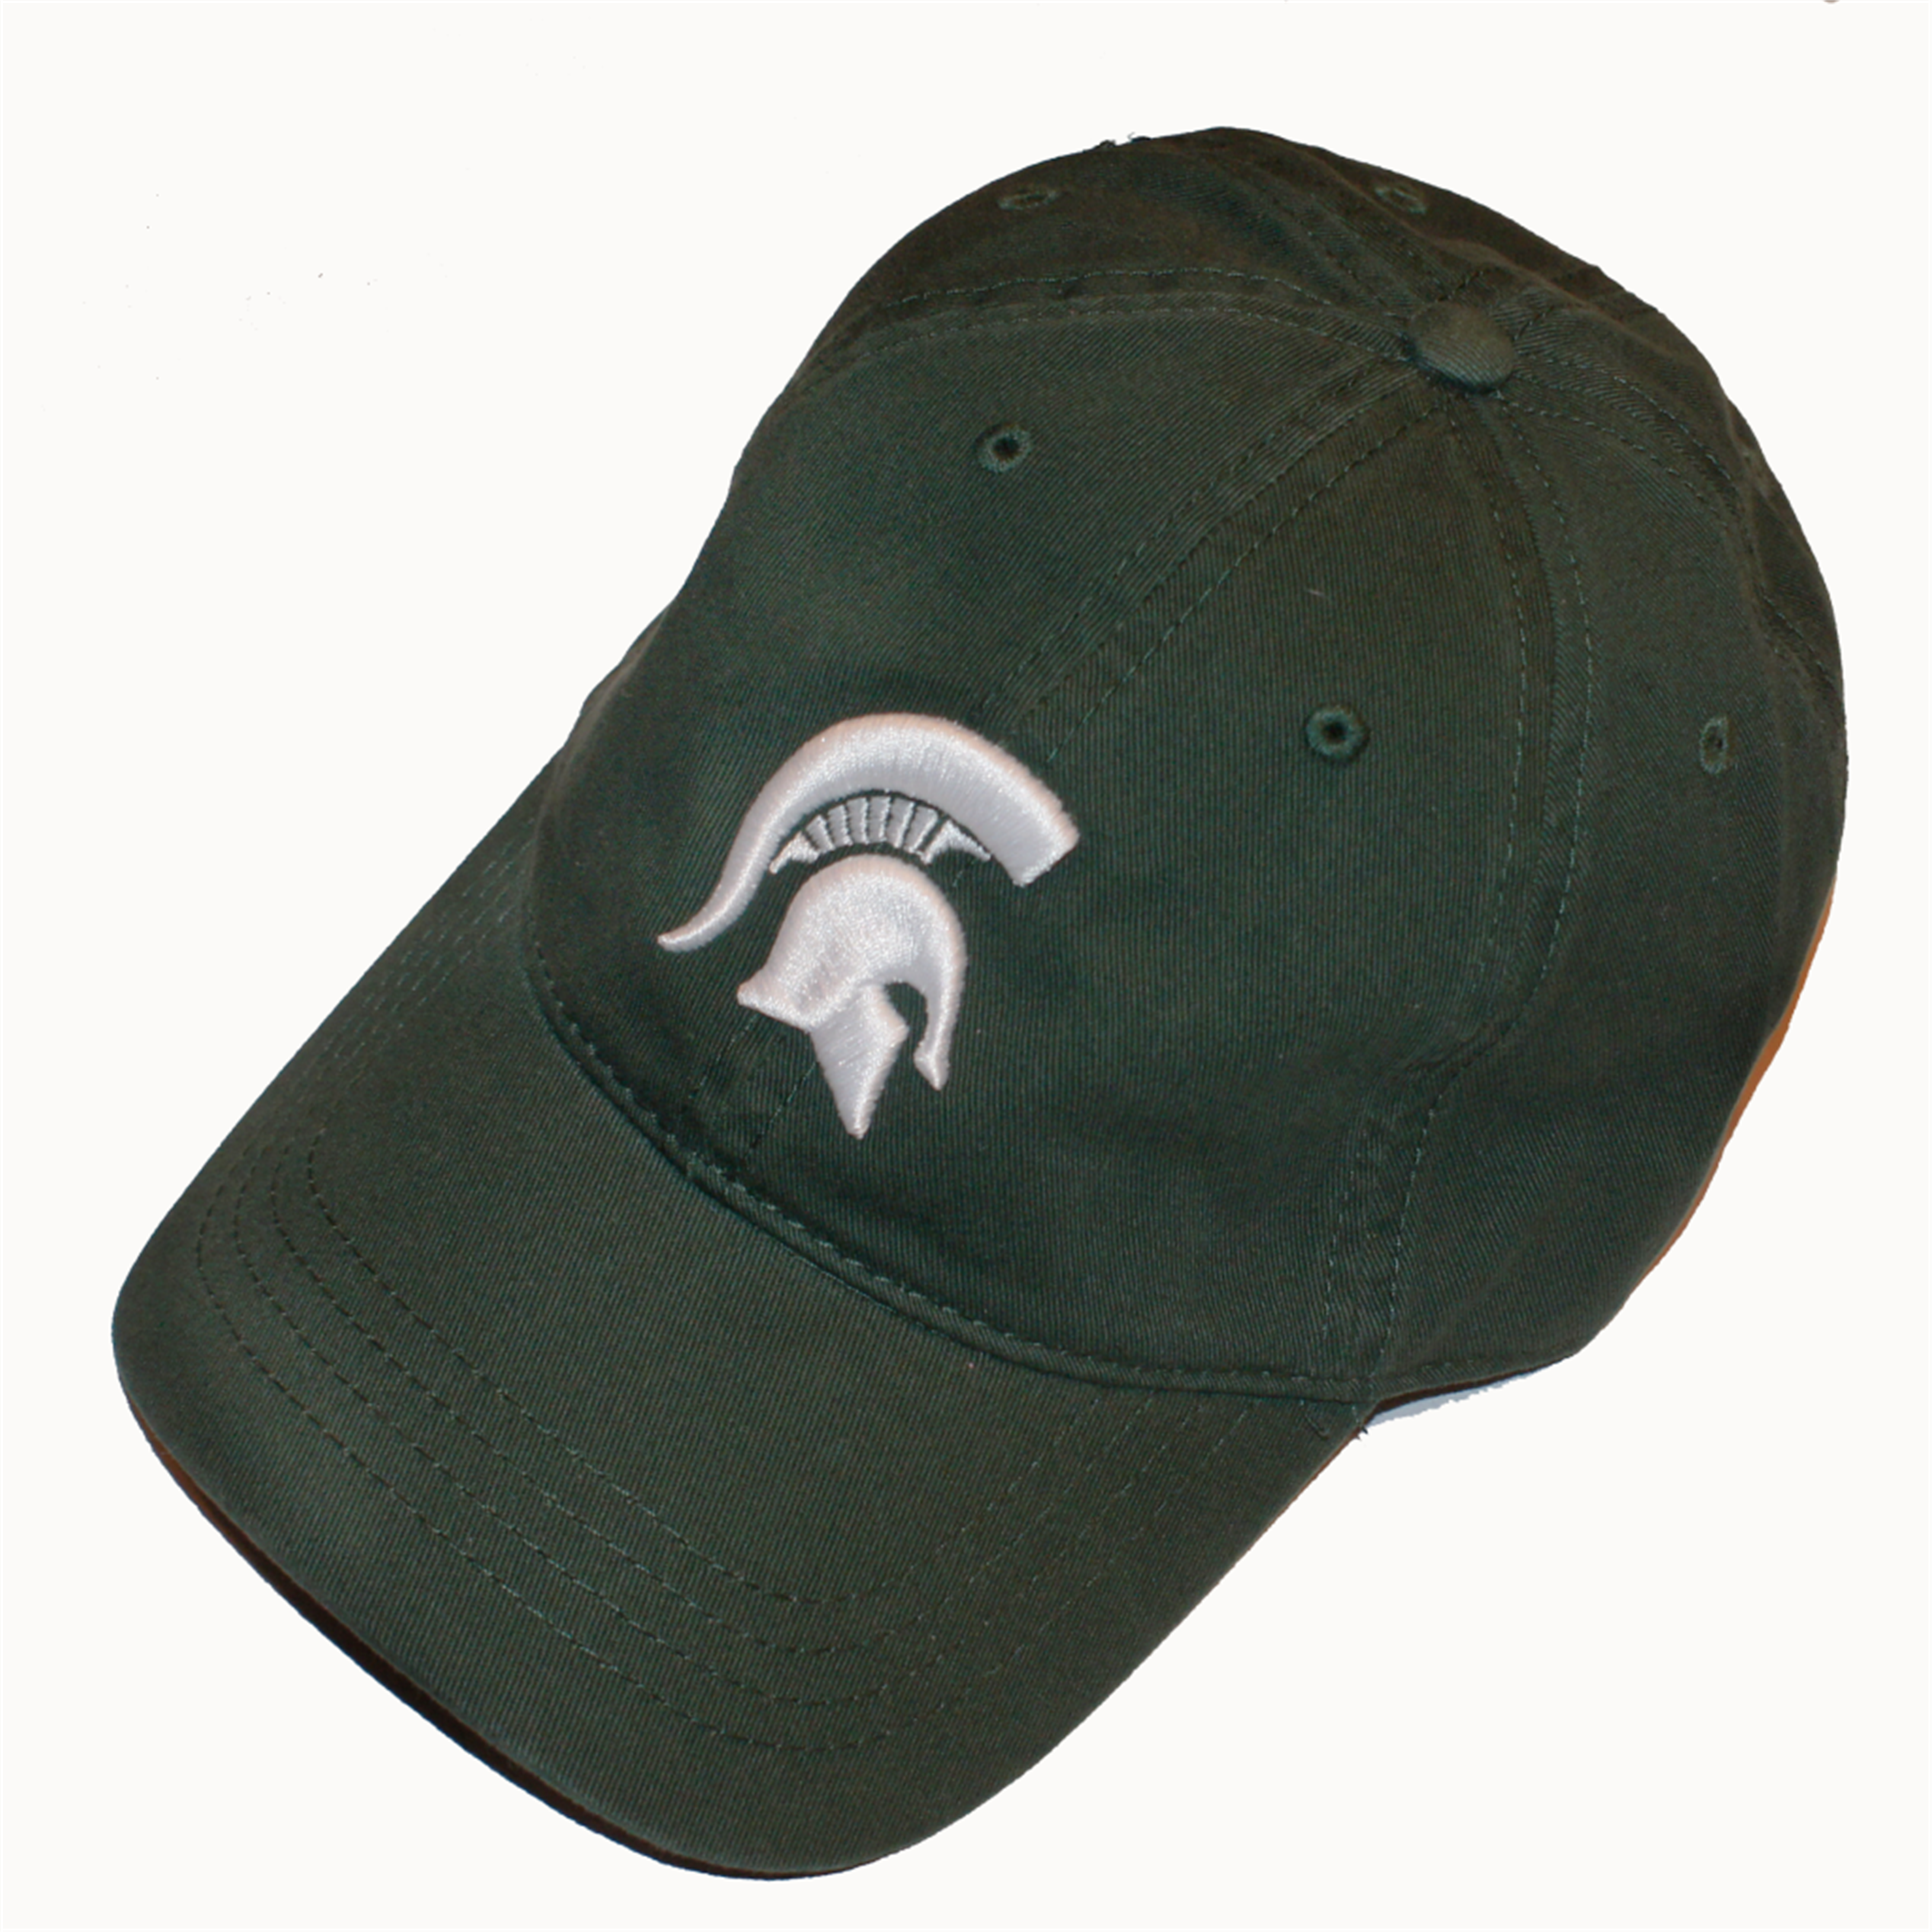 Green 6 panel cotton Hat with White Spartan Head